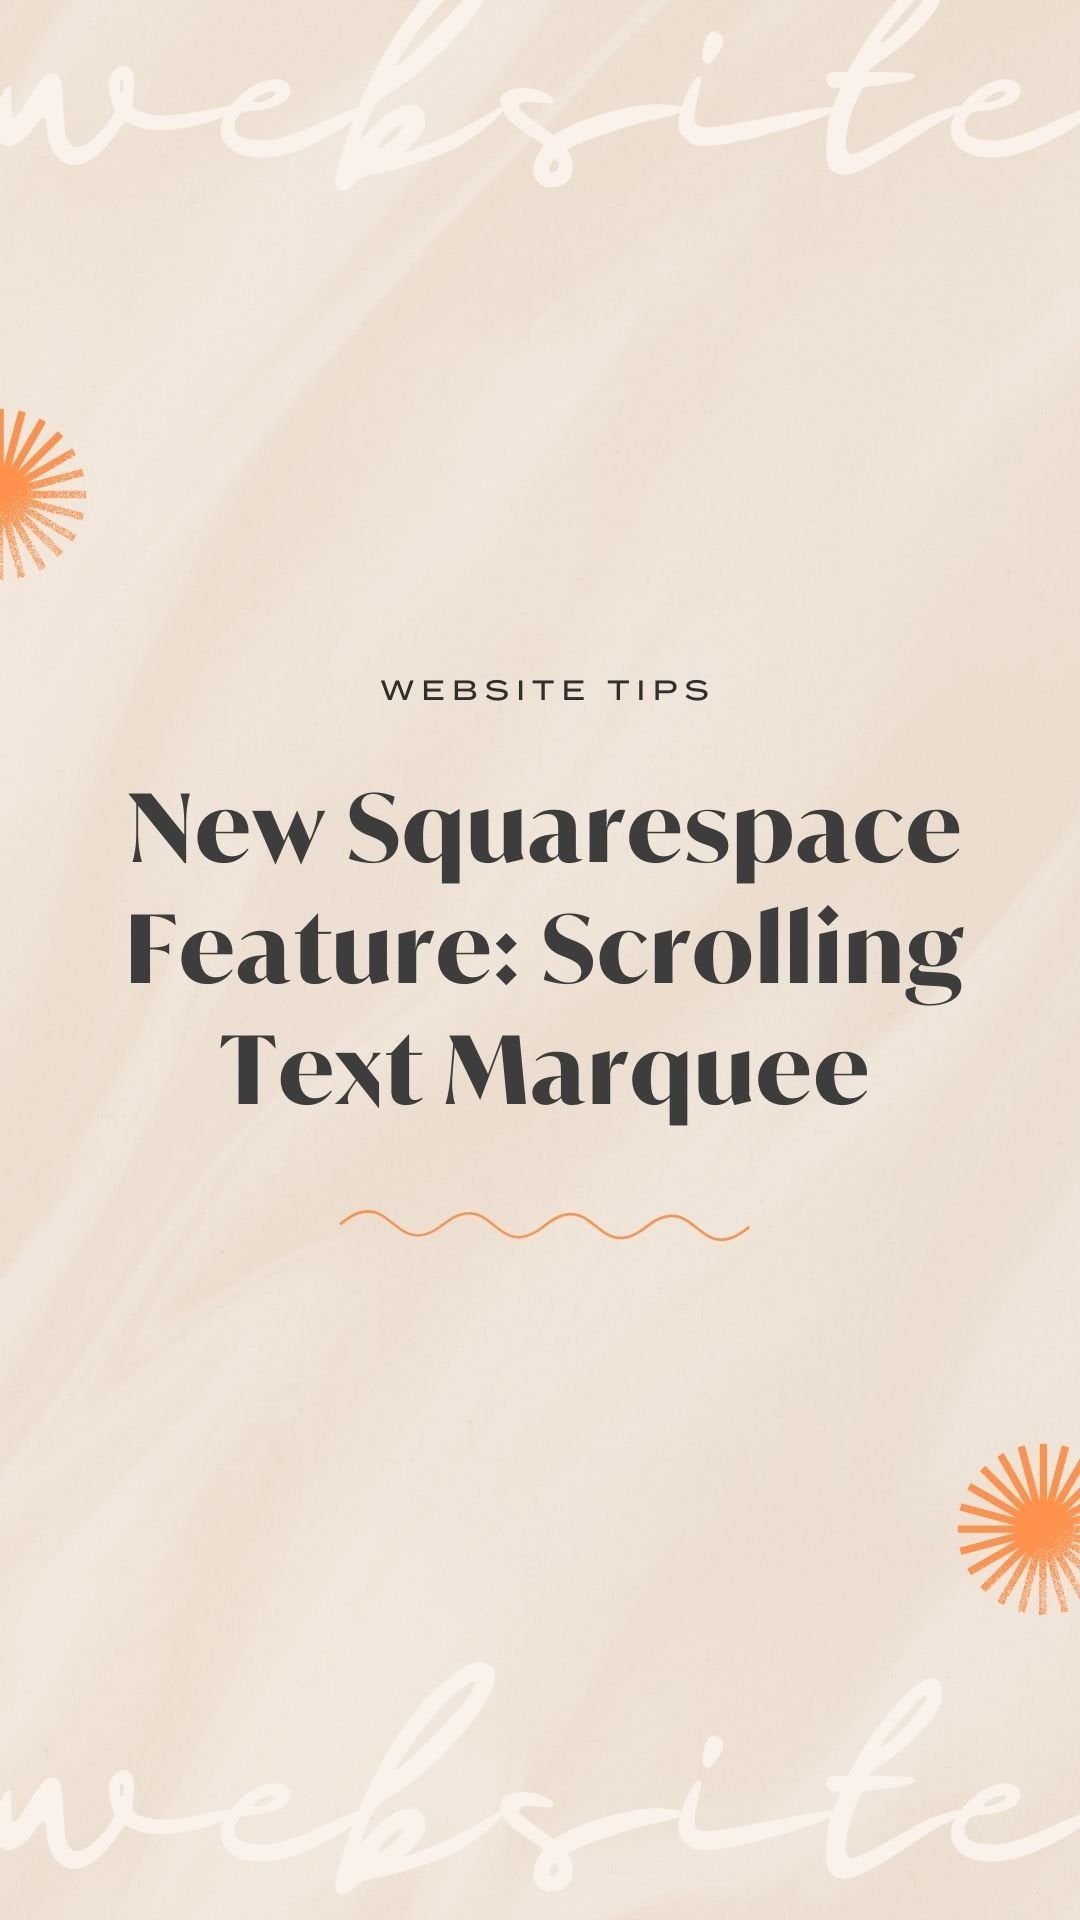 New Squarespace Feature: Scrolling Text Marquee